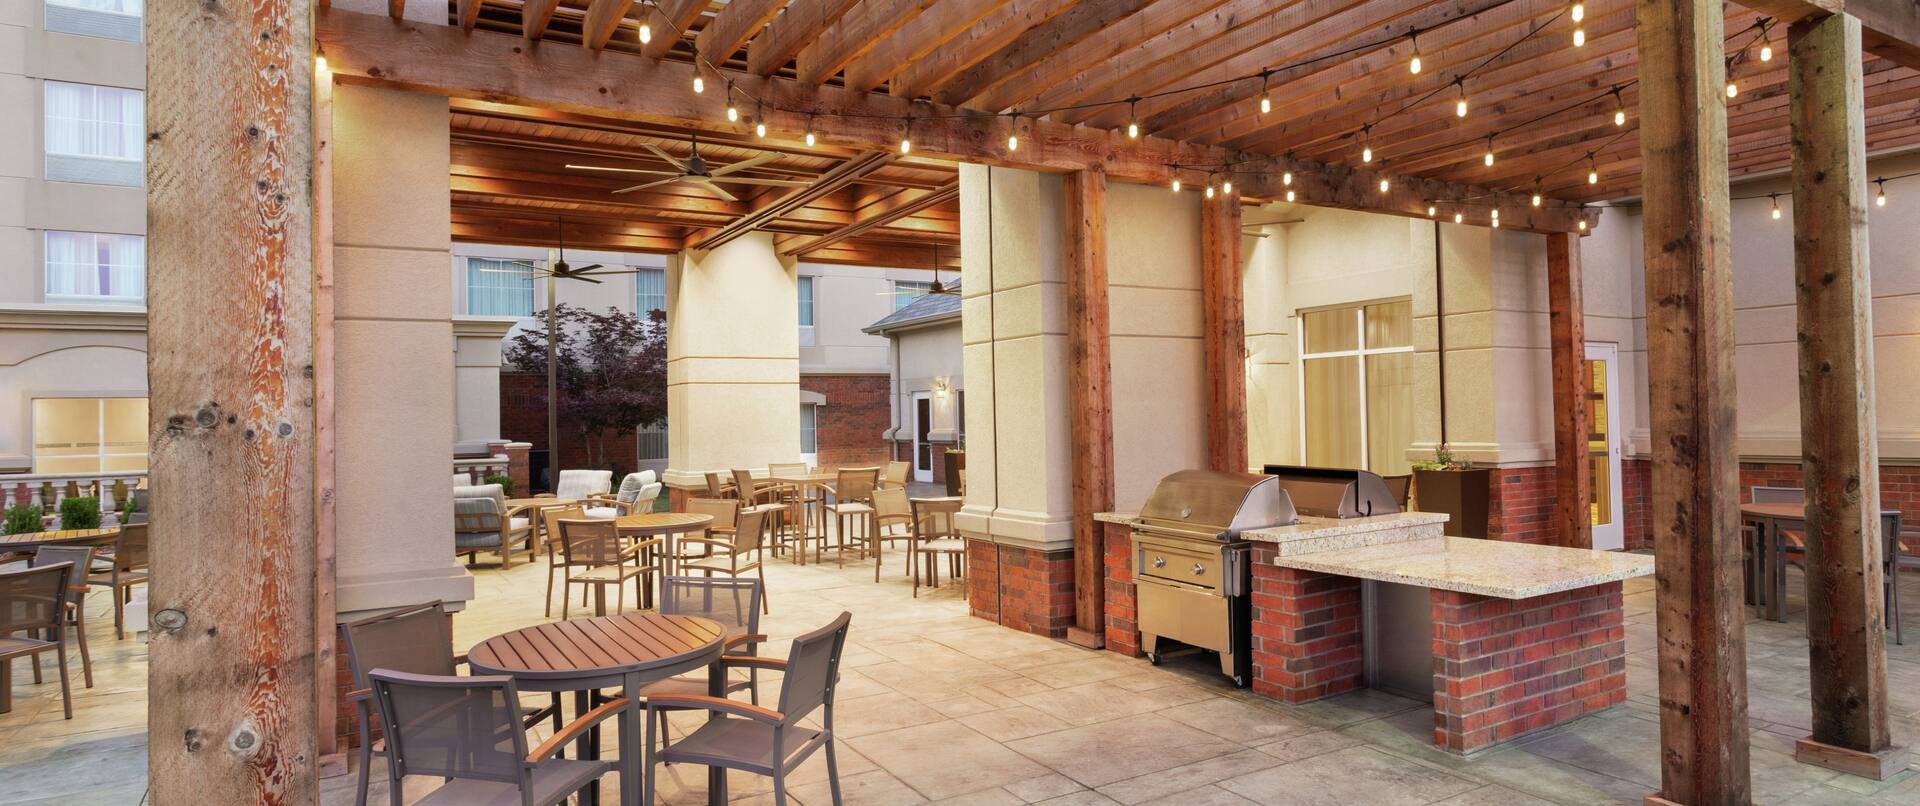 Beautiful outdoor pergola area for guests to relax featuring ample seating, bbq grills, and string lights.